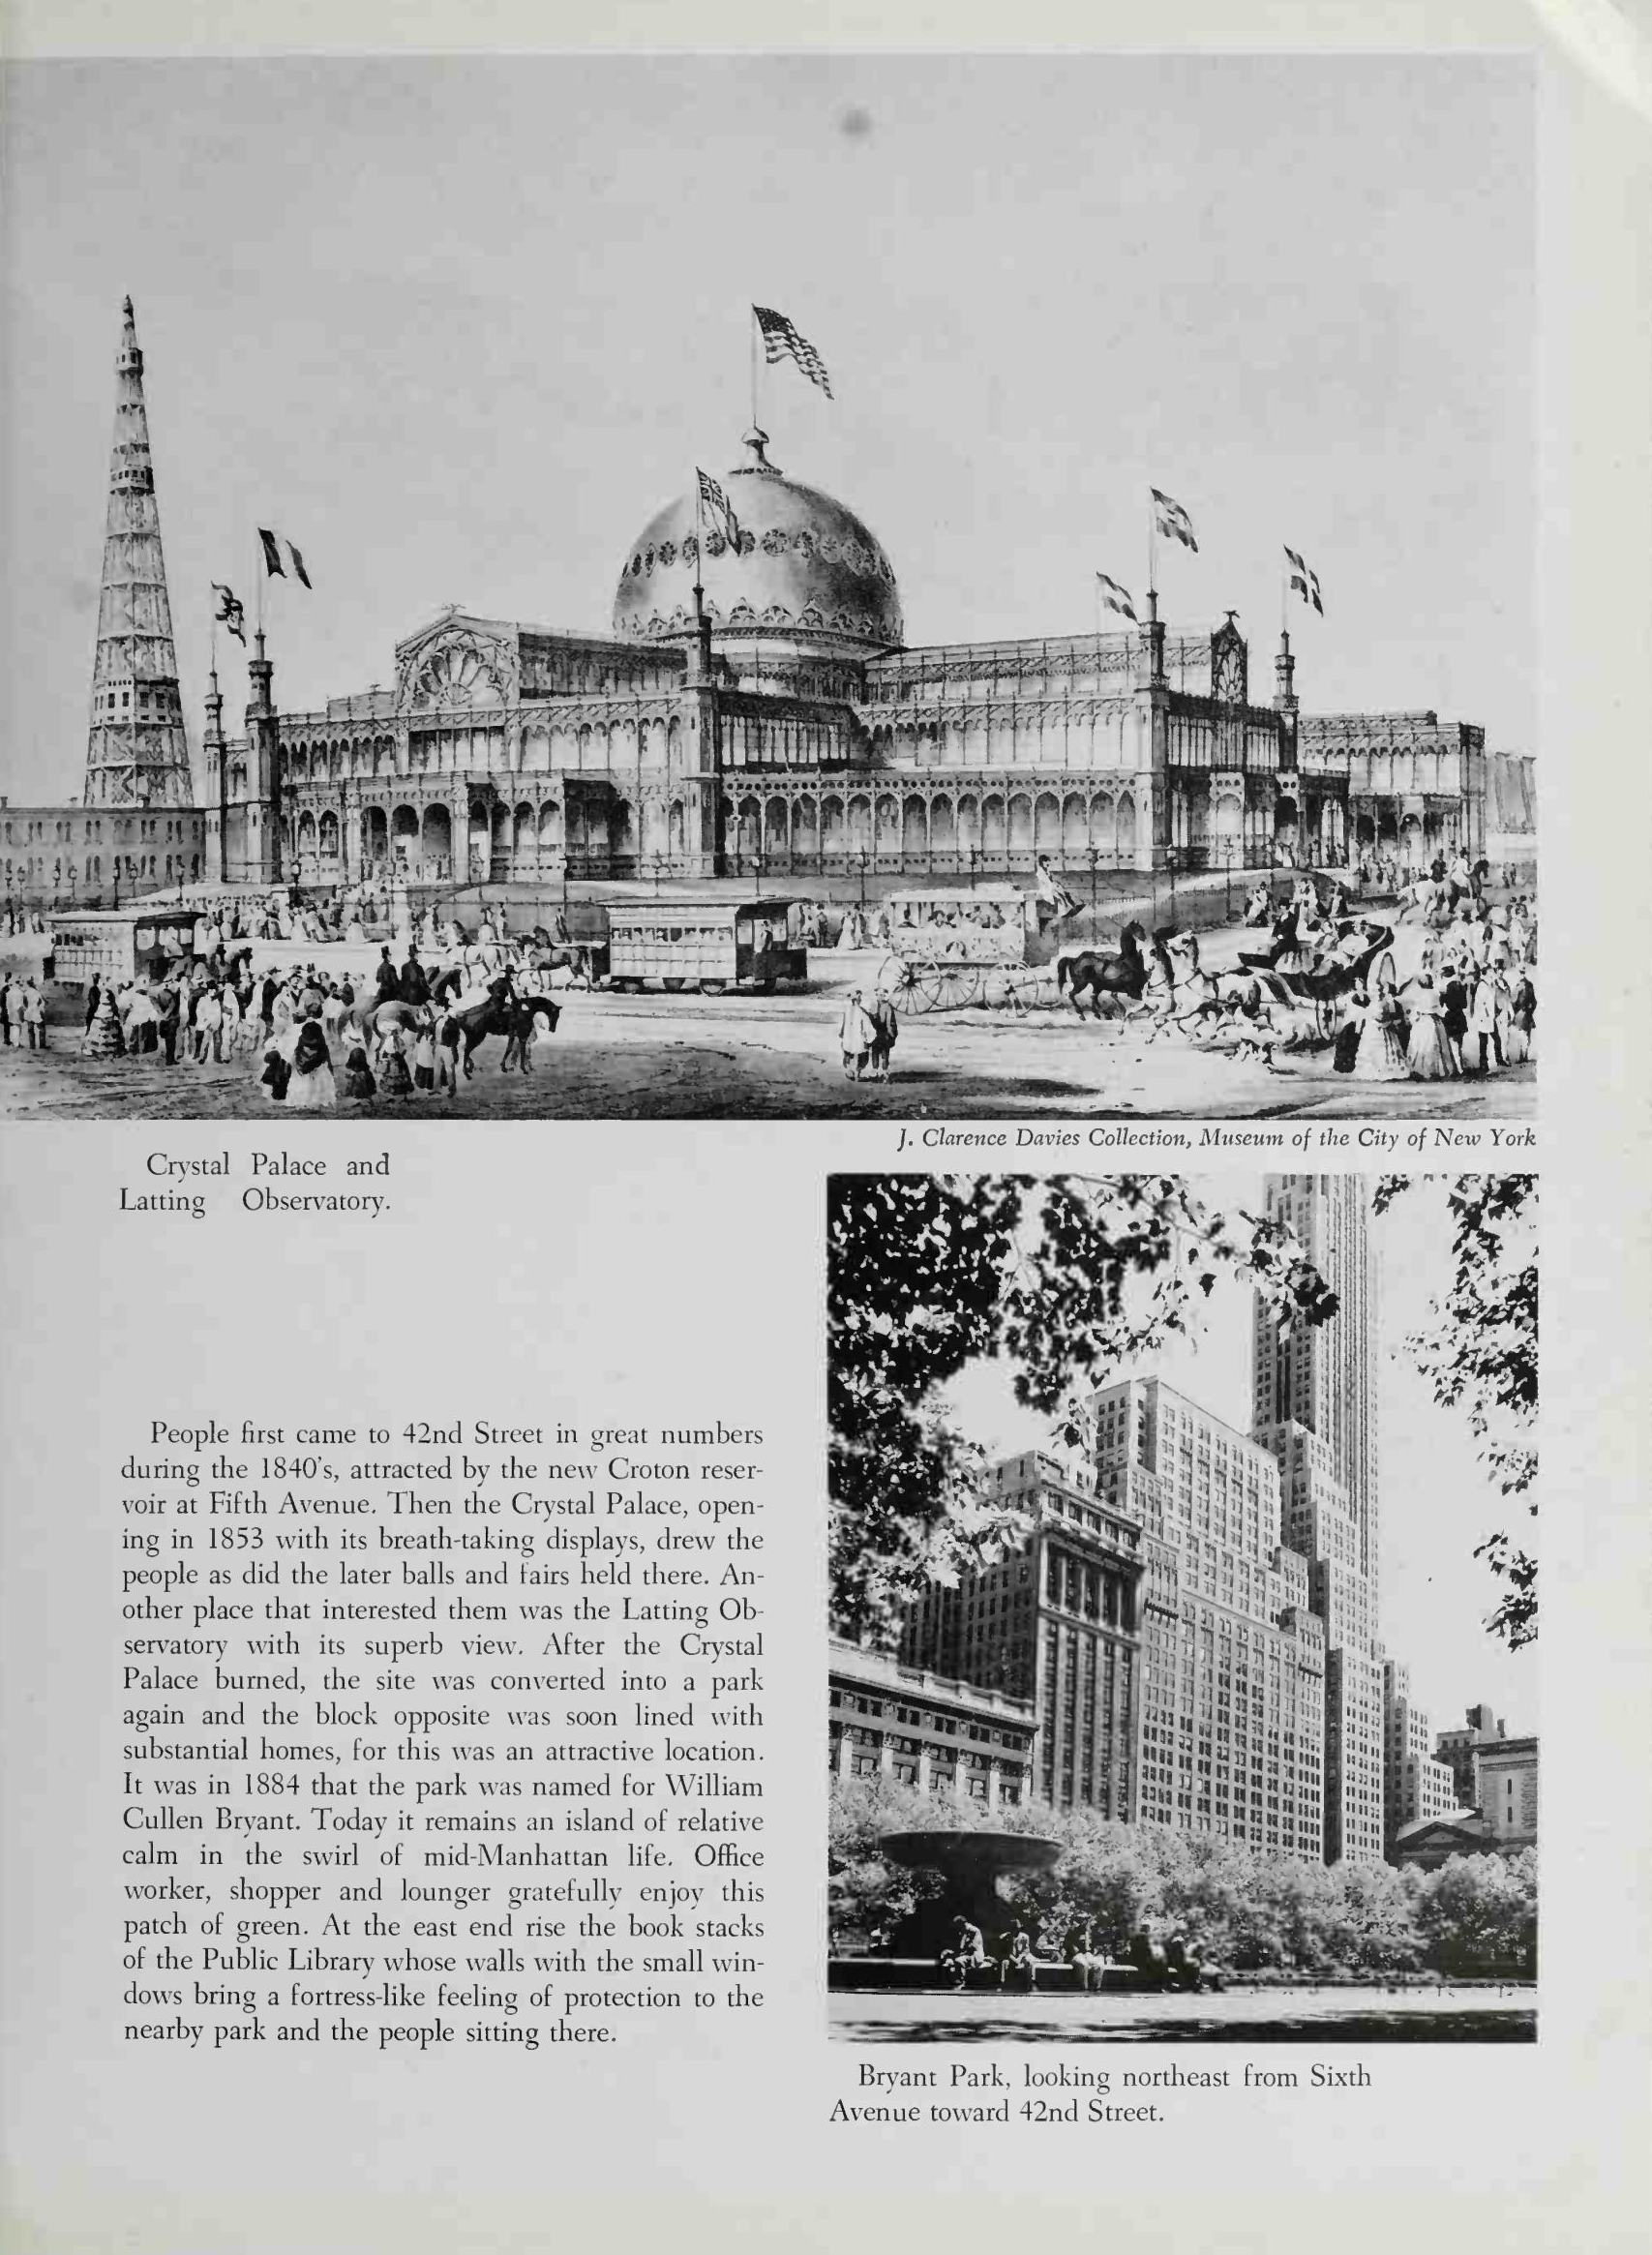 The face of New York : The city as it was and as it is : With prints and contemporary photographs of the past and the same scenes today in photographs by Andreas Feininger : History and description by Susan E. Lyman, Museum of the city of New York. — New York : Crown Publishers, Inc., 1954